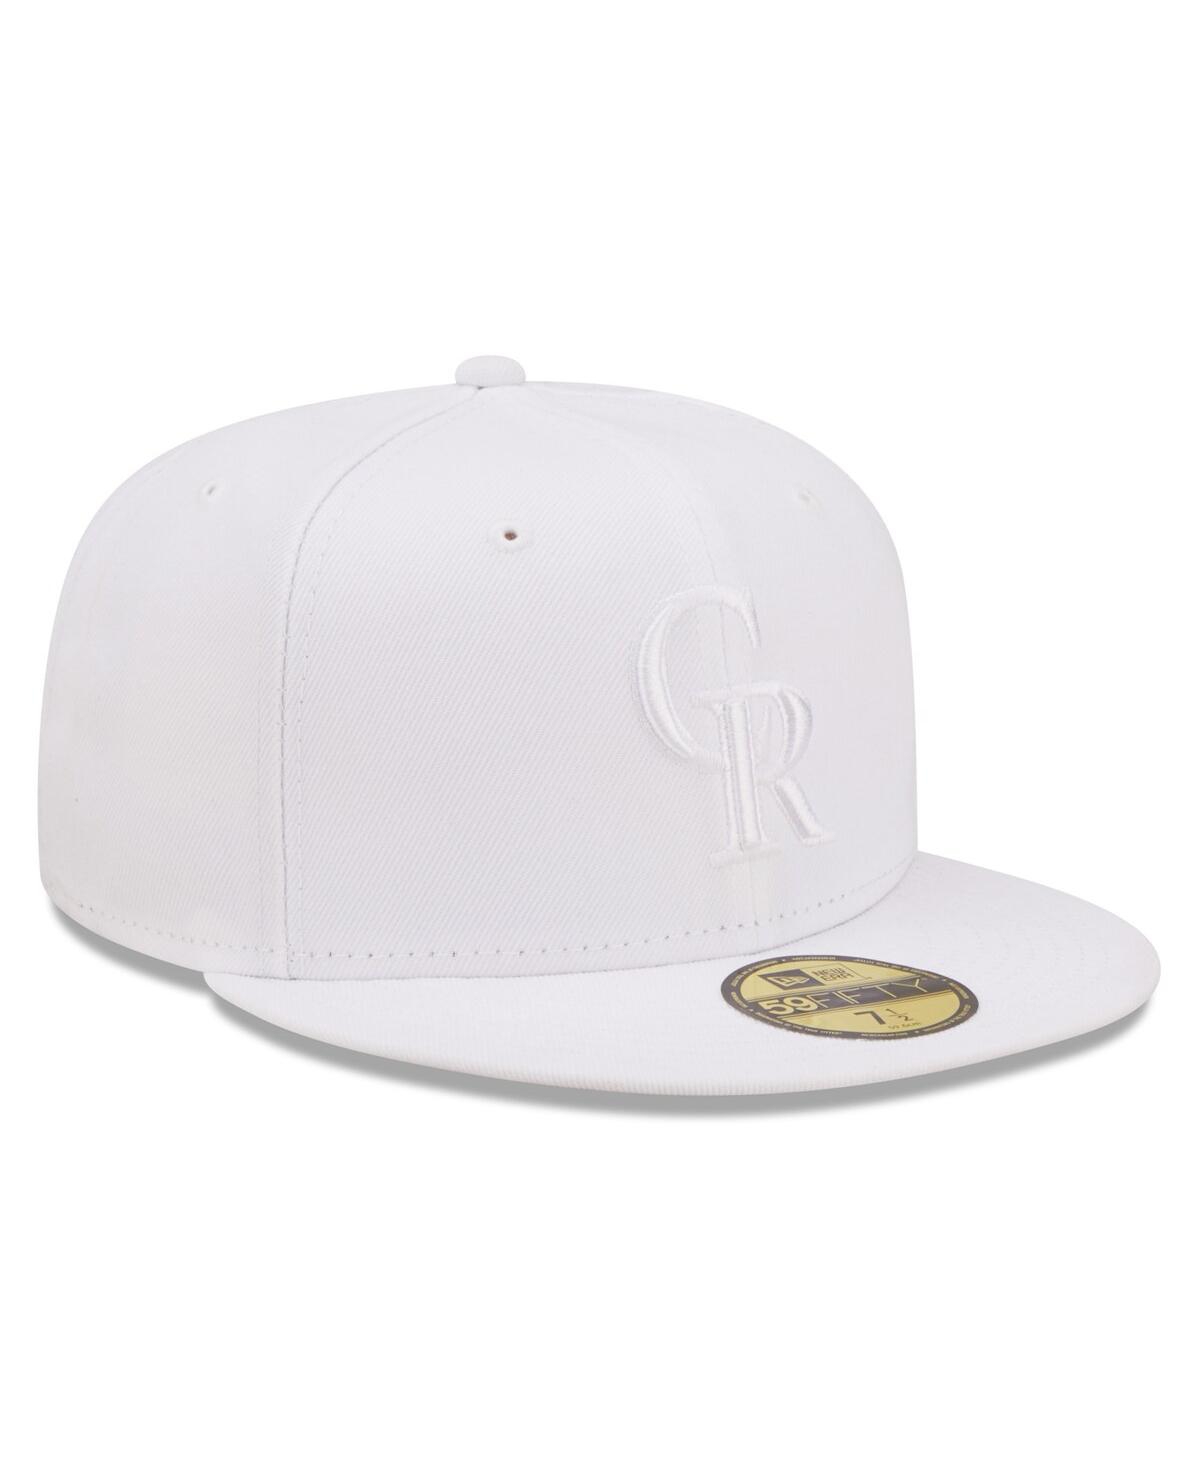 Shop New Era Men's  Colorado Rockies White On White 59fifty Fitted Hat